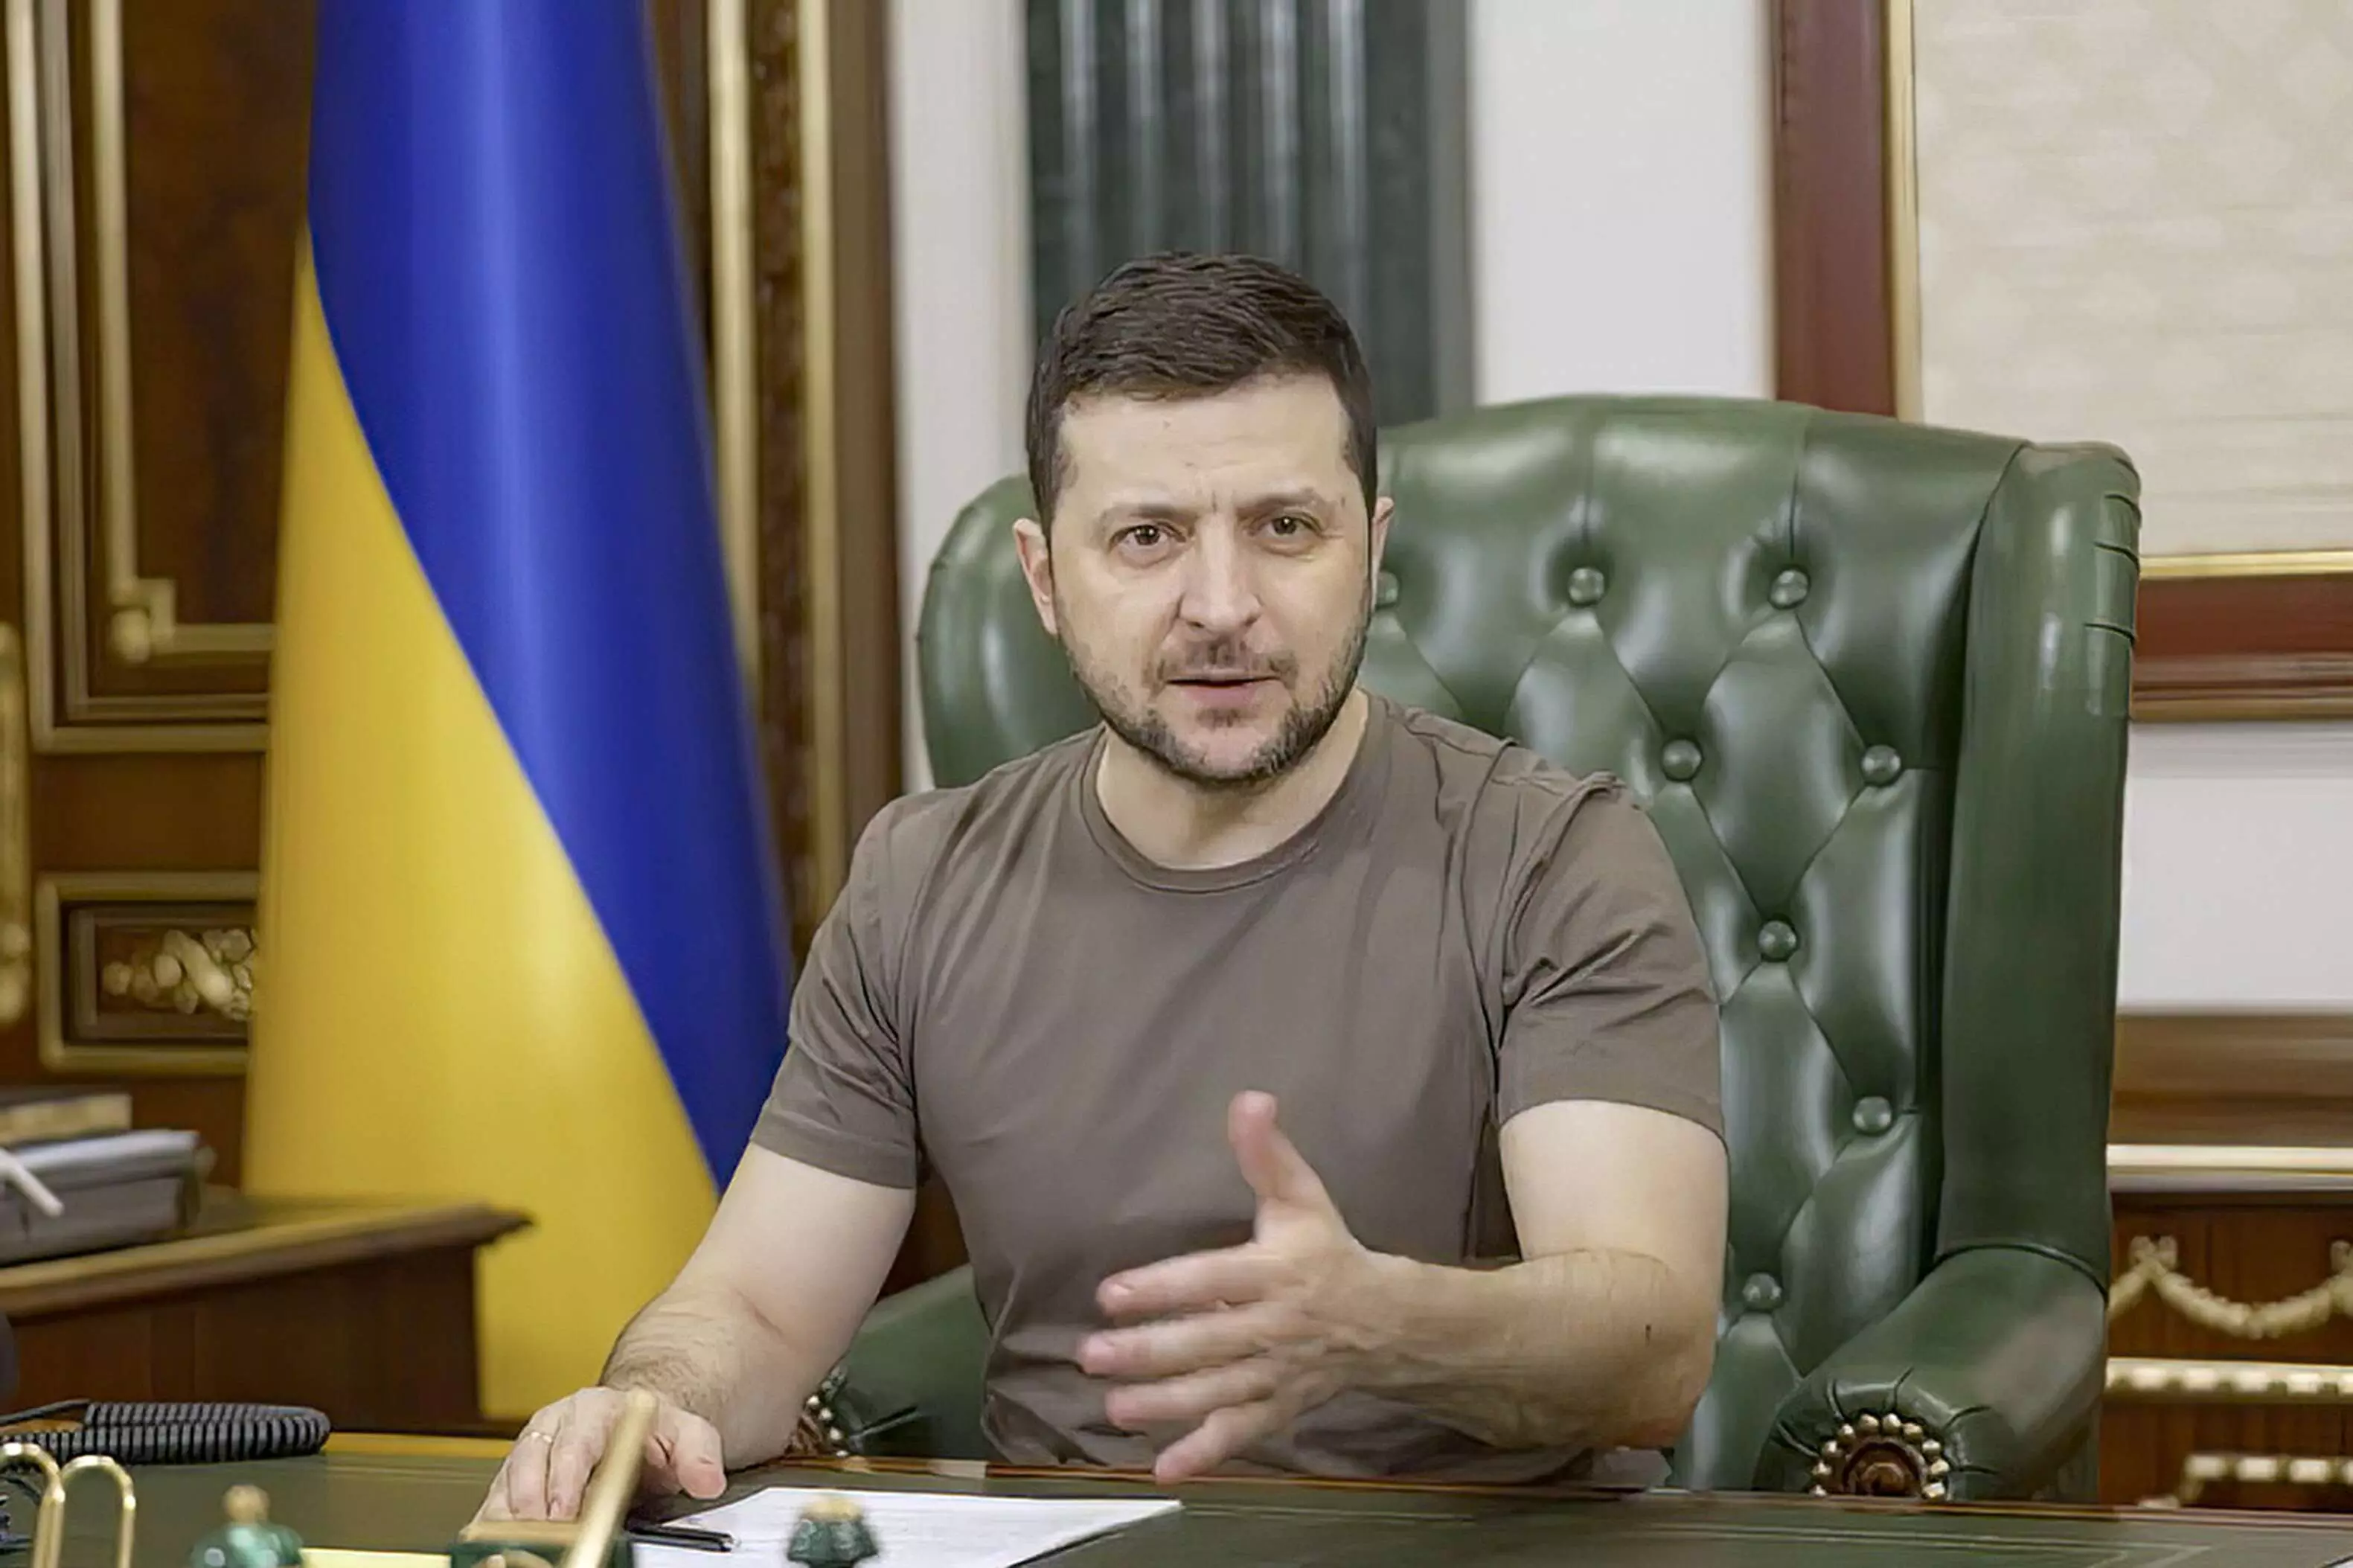 Zelenskyy: Bakhmut is only in our hearts after Ukraine loses control of destroyed city to Russia